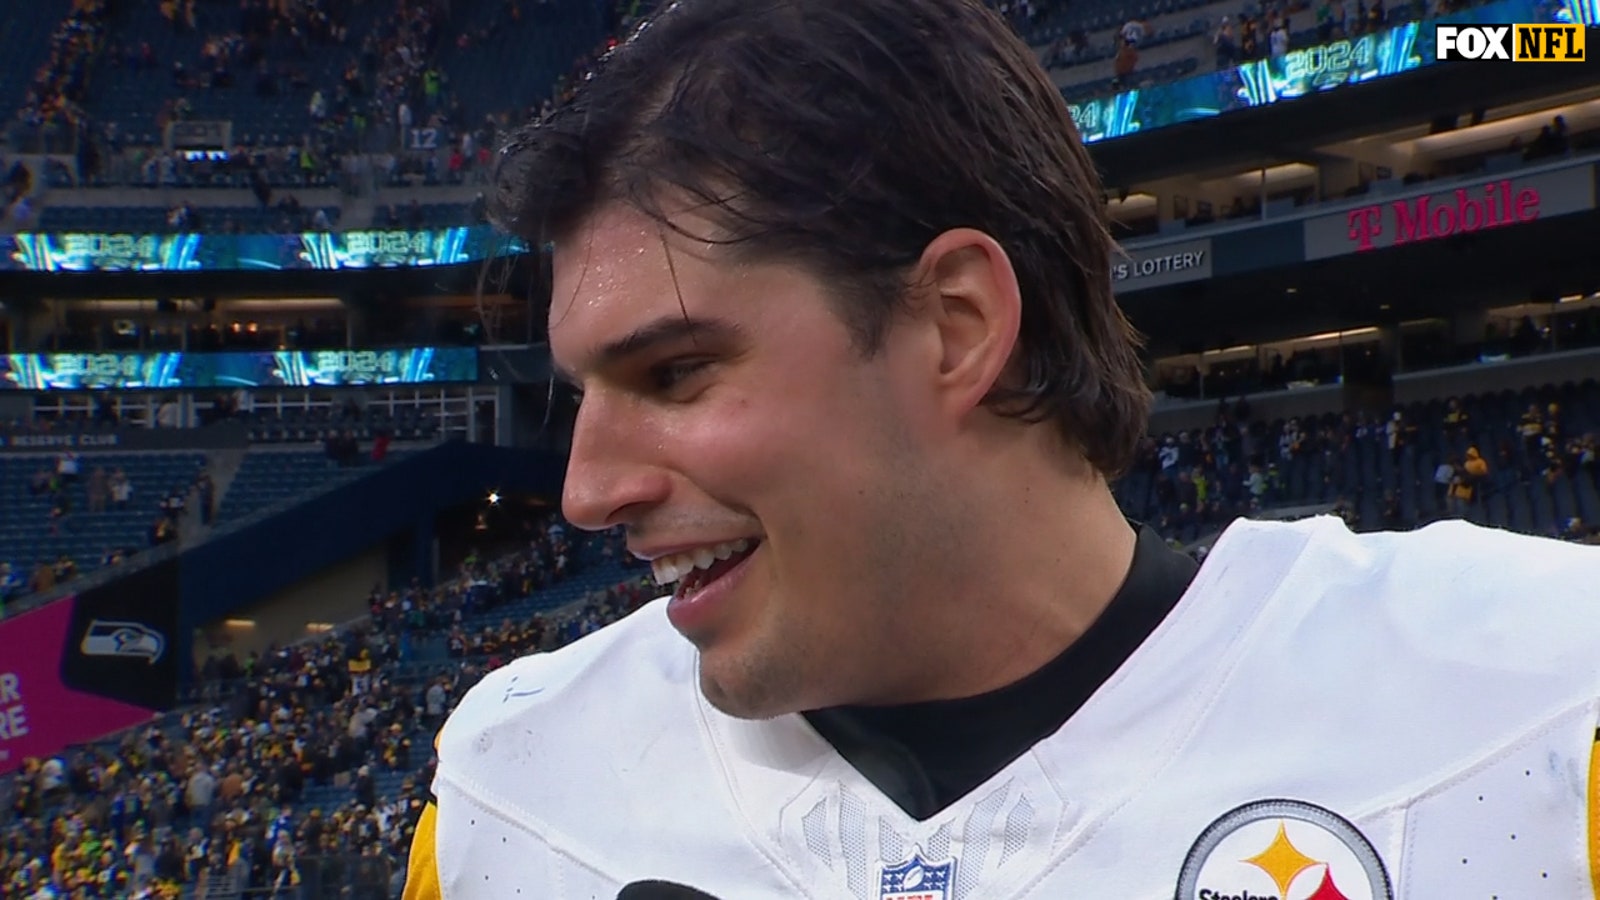 'A lot of gratitude' – Steelers' Mason Rudolph after historic 30-23 win over Seahawks